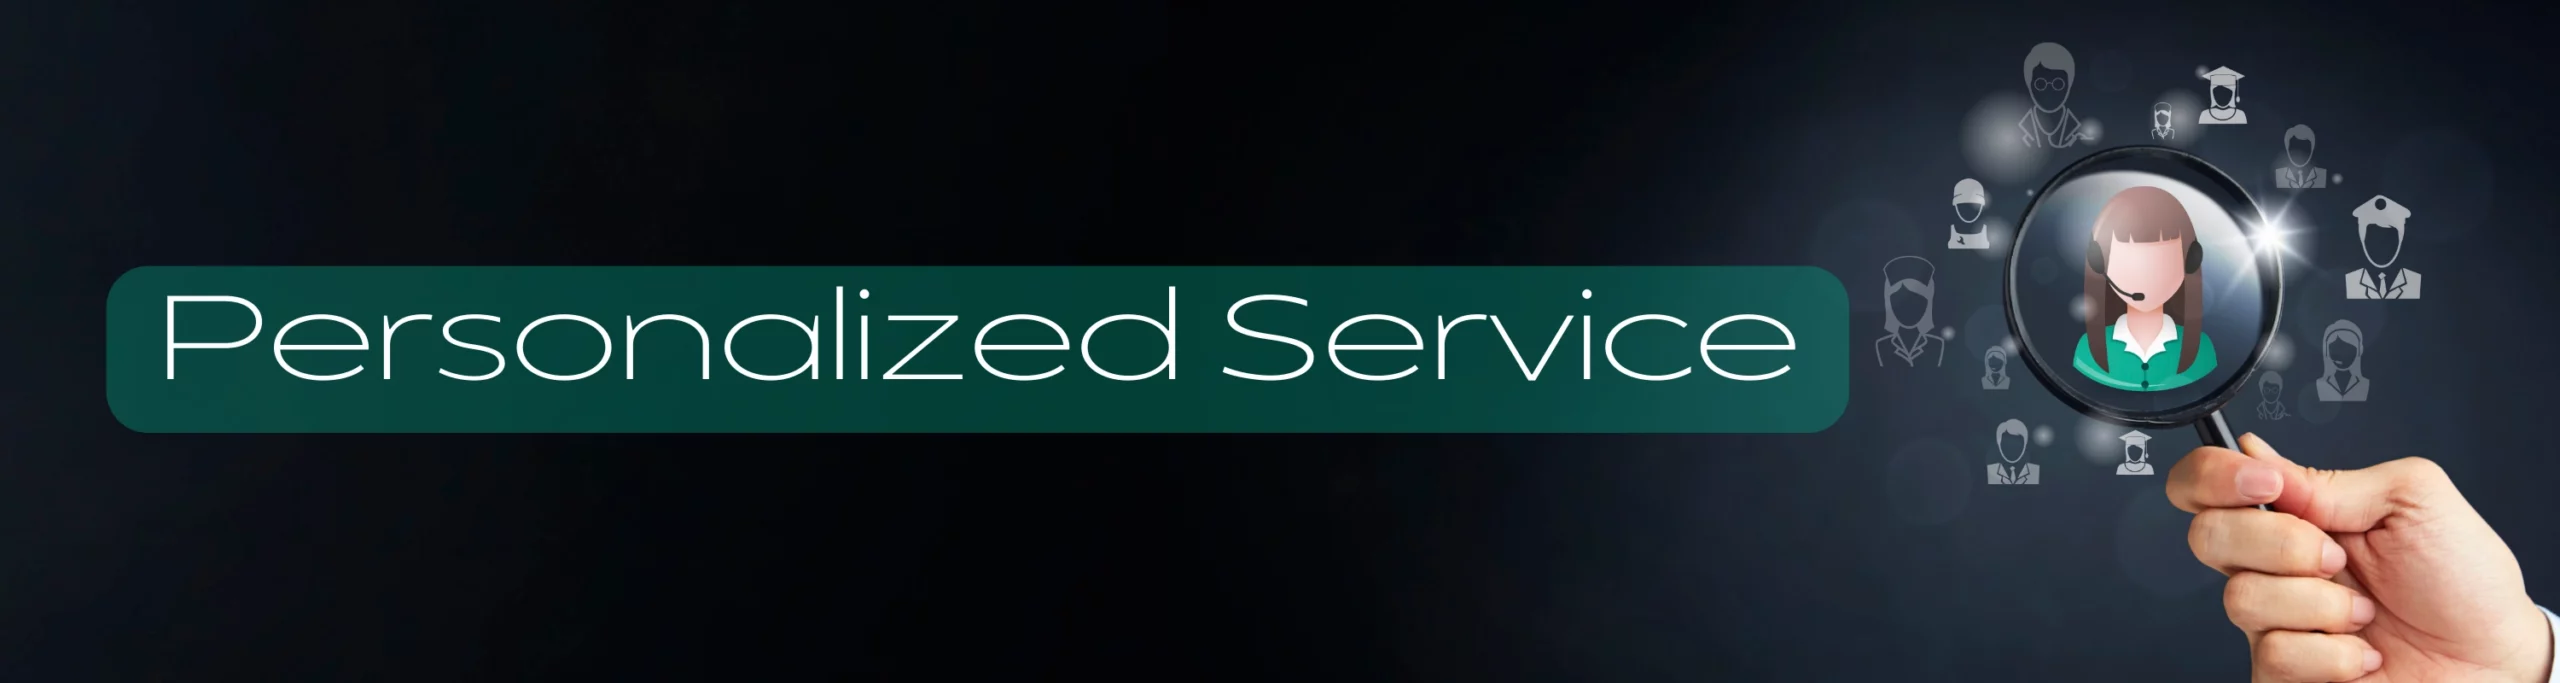 Personalized Service Banner